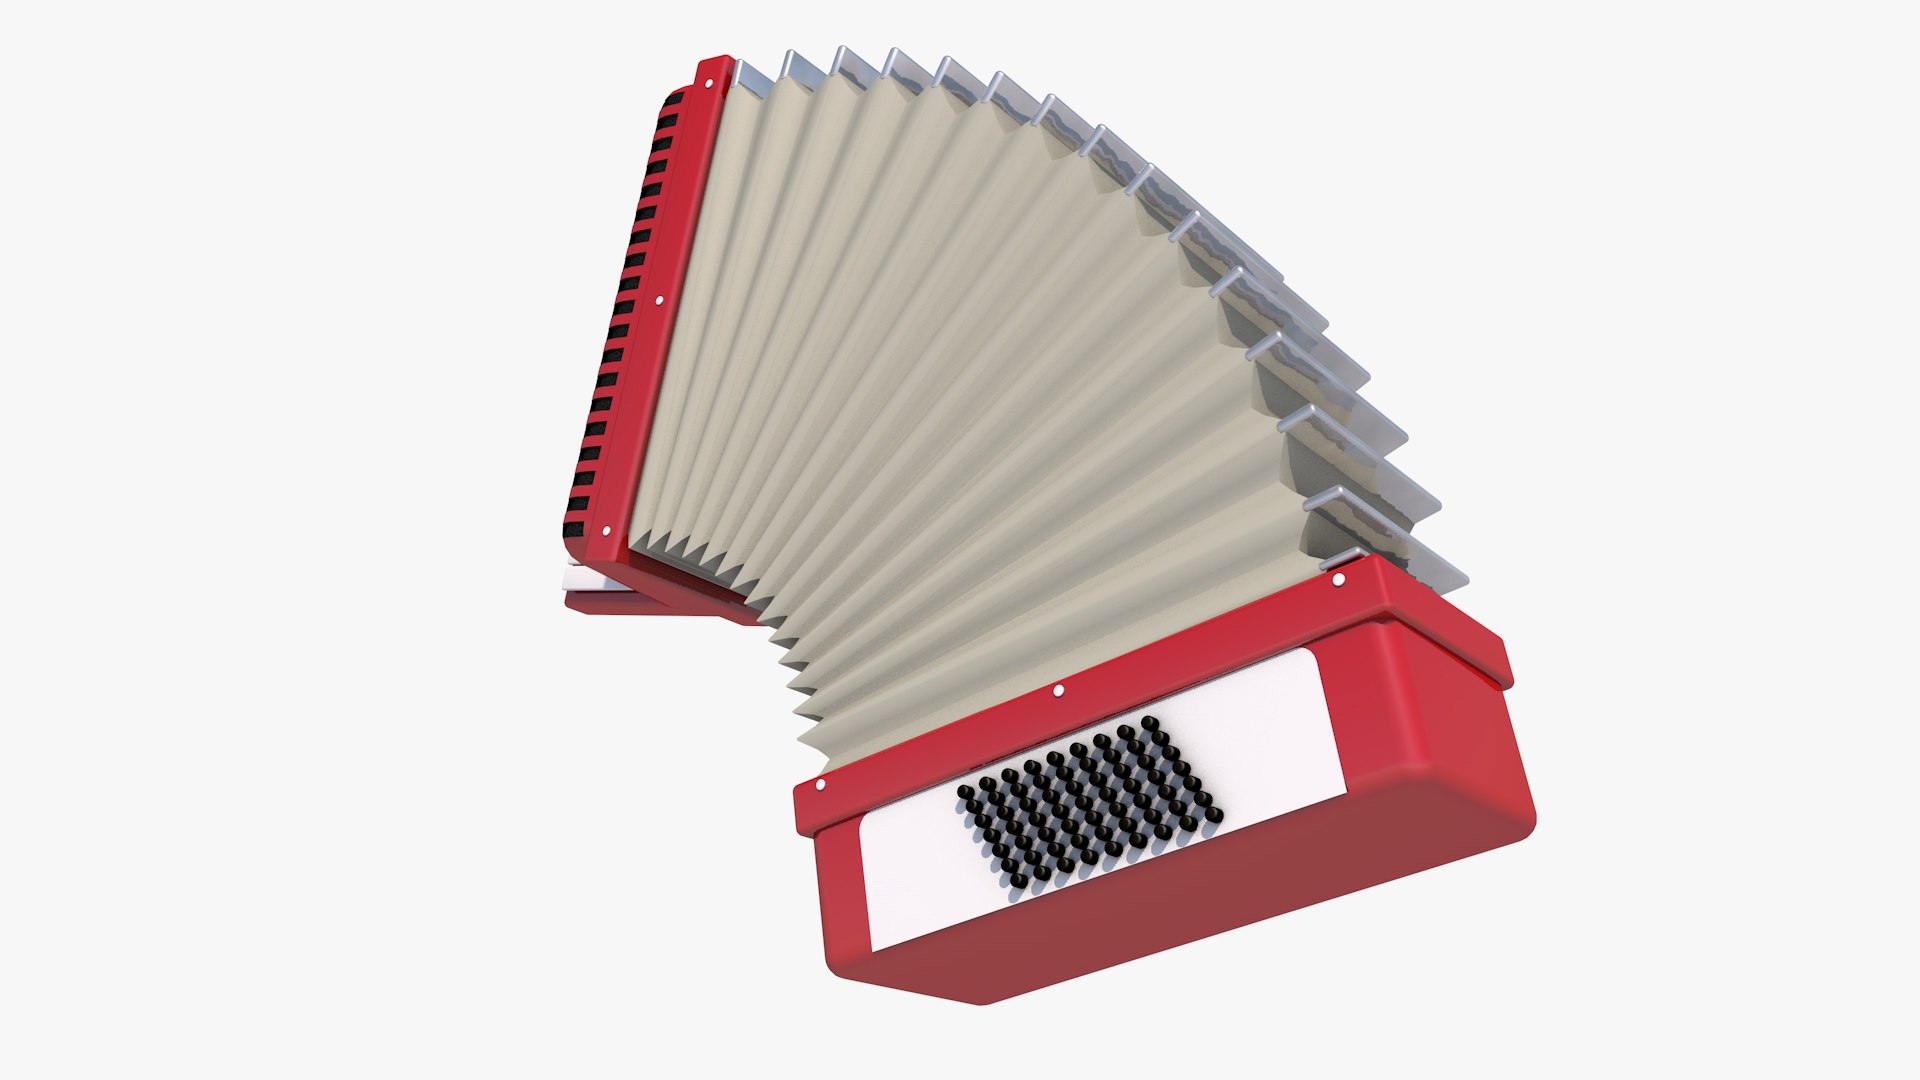 1,033 Toy Accordion Images, Stock Photos, 3D objects, & Vectors